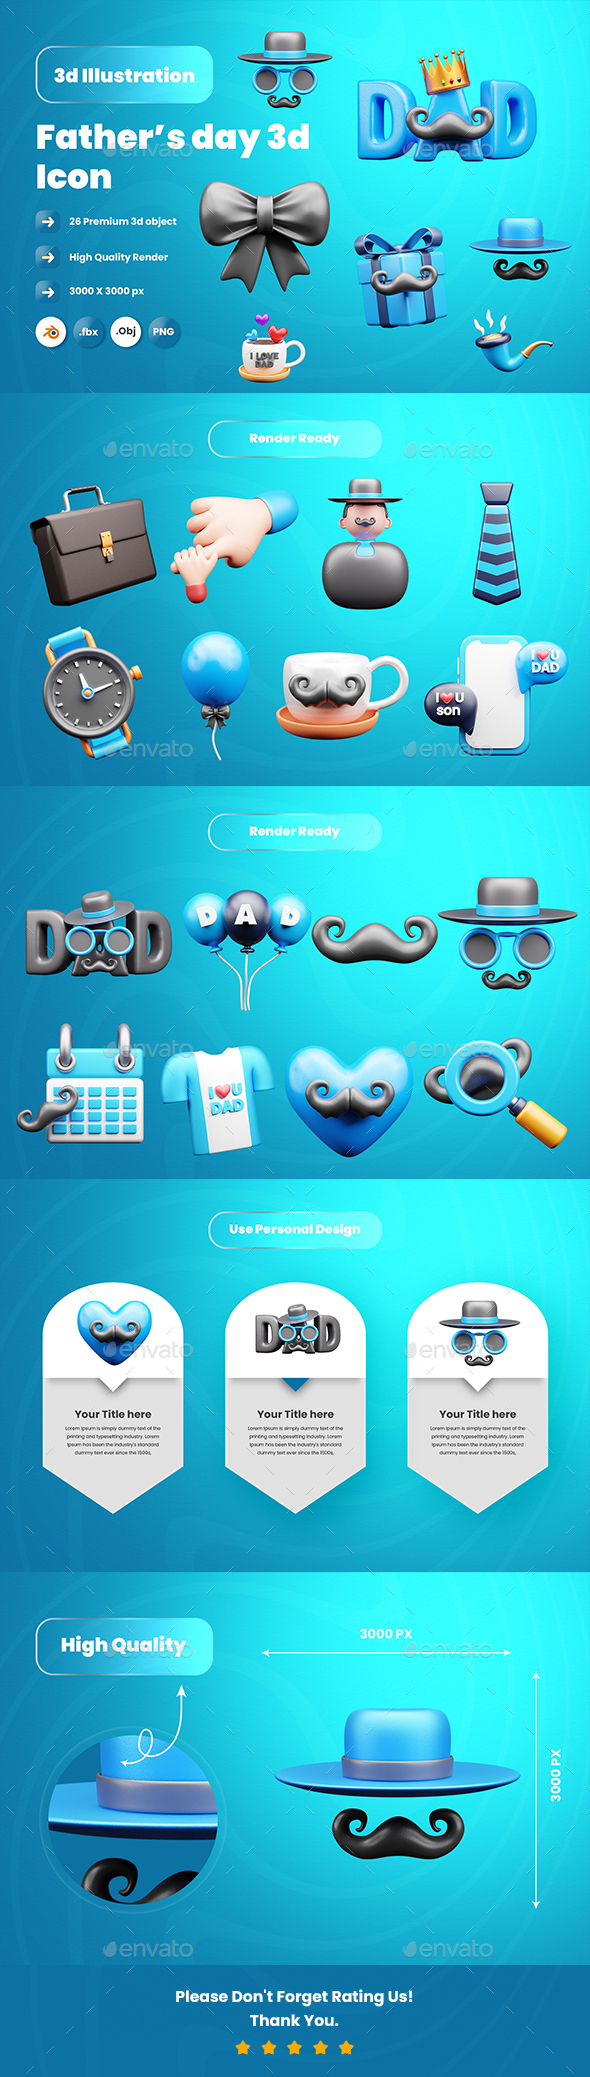 [DOWNLOAD]Father's Day 3d Illustration  Icon Pack